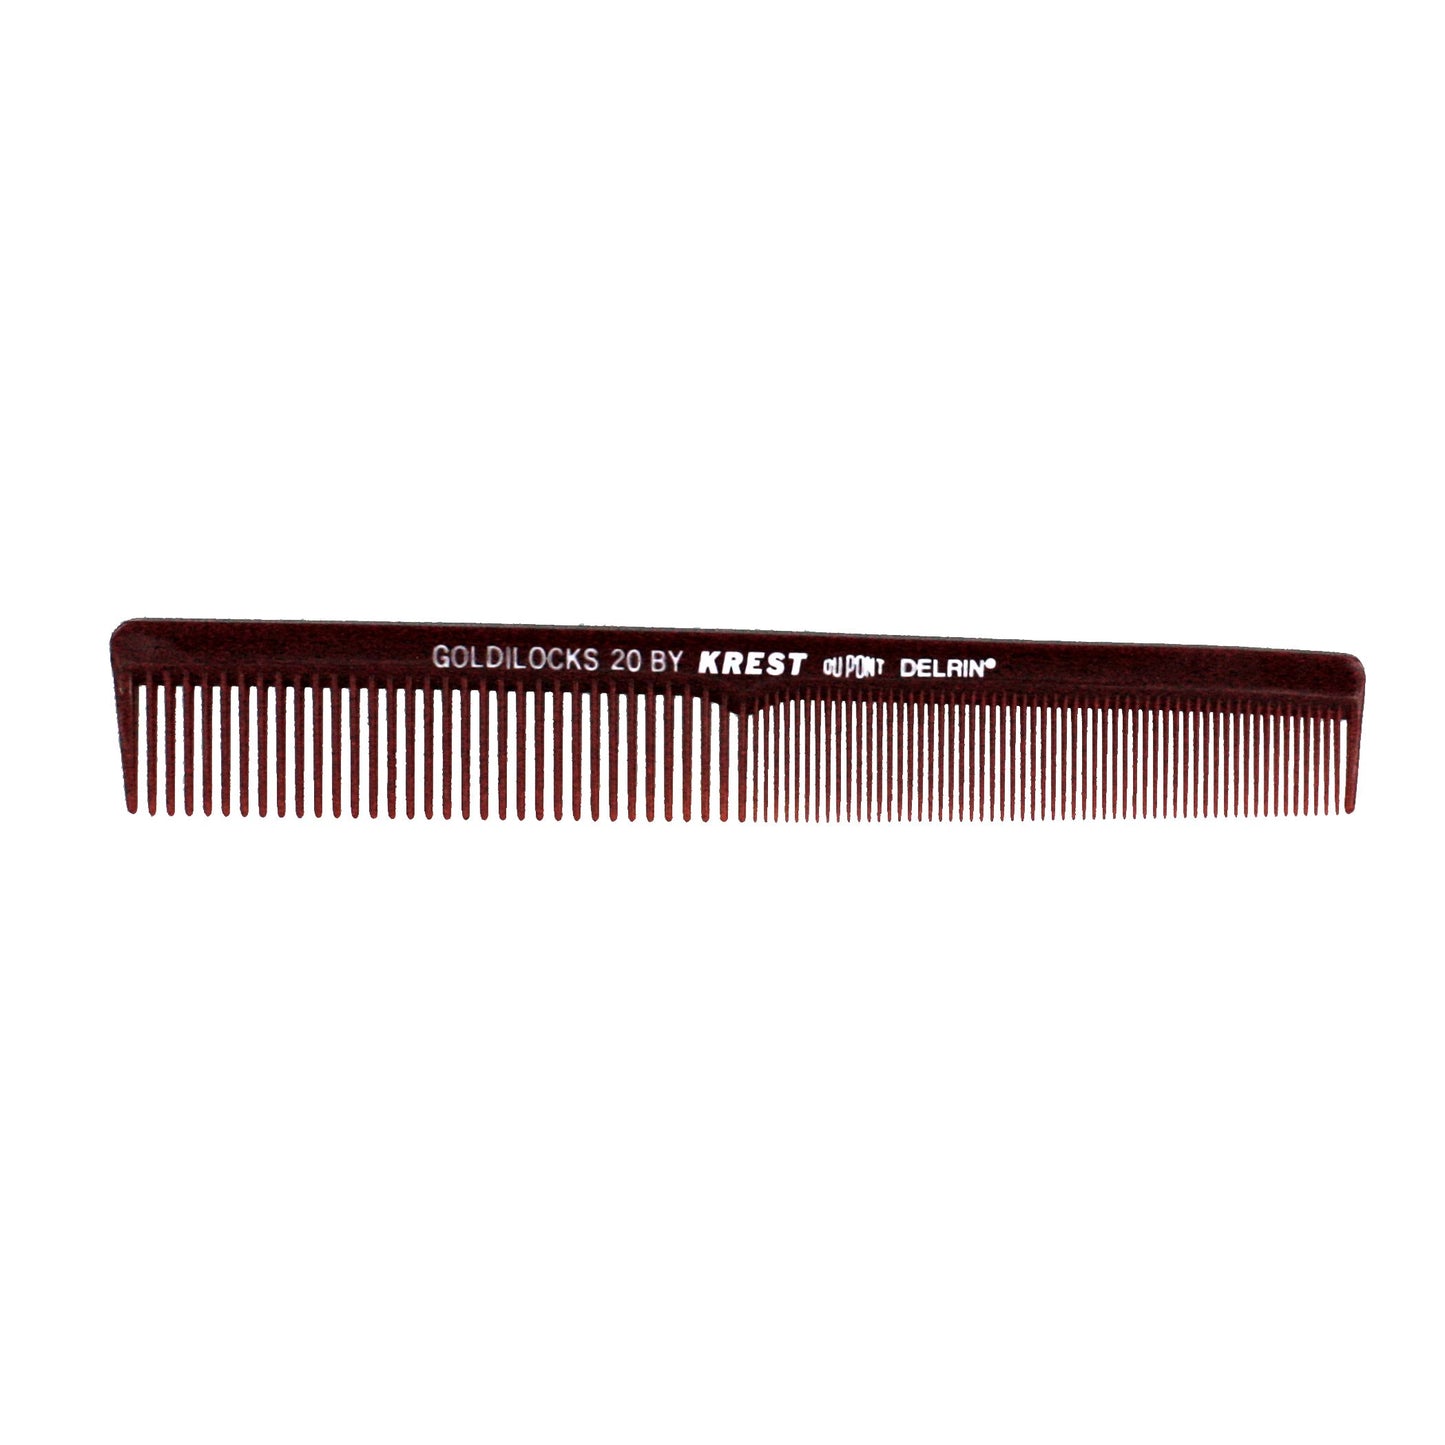 7in, Delrin Plastic, Finger Wave Comb with Inch Marks - CLOSEOUT, LIMITED STOCK AVAILABLE